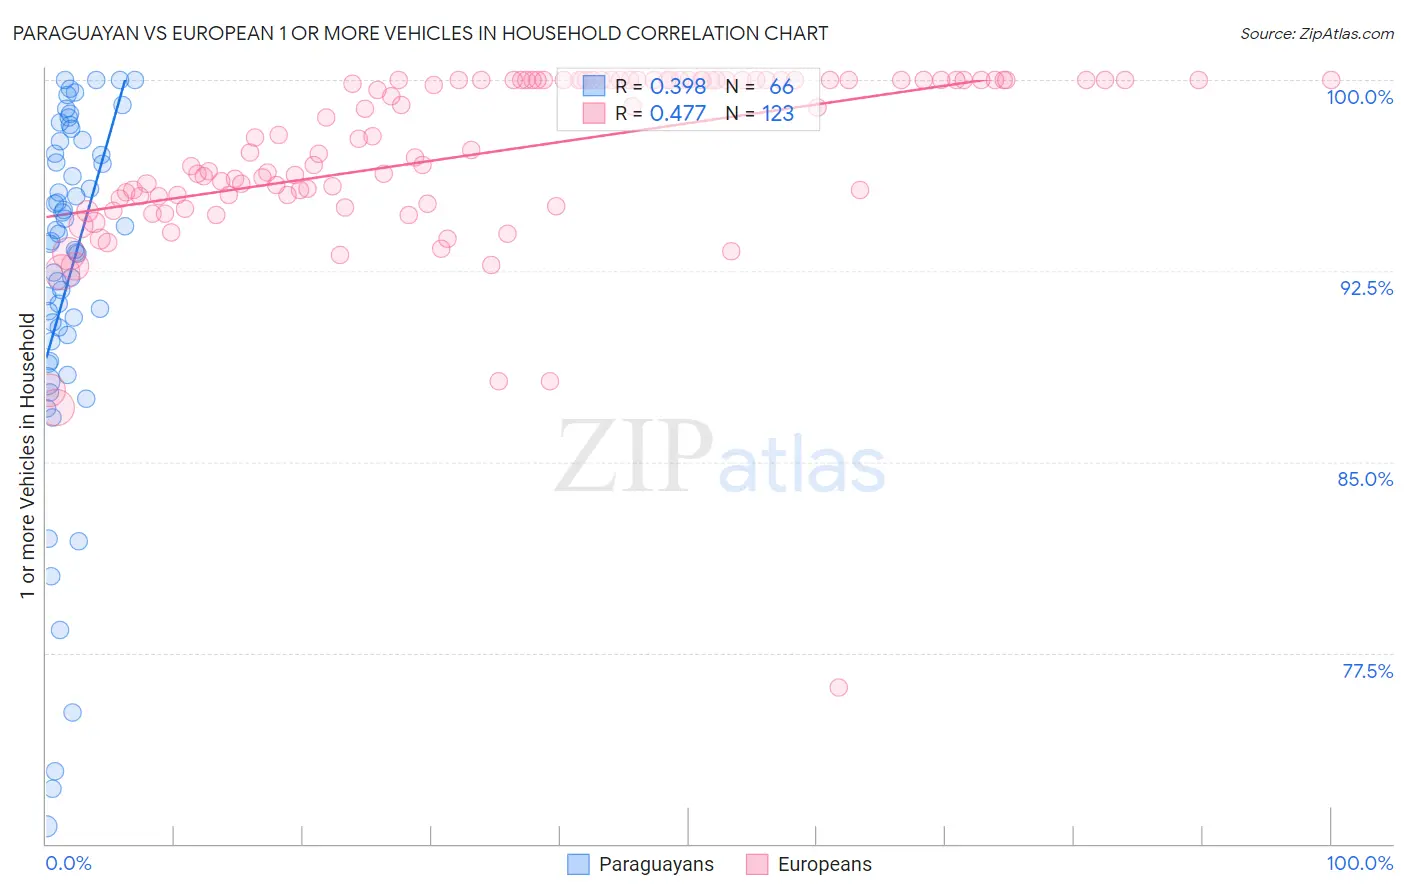 Paraguayan vs European 1 or more Vehicles in Household